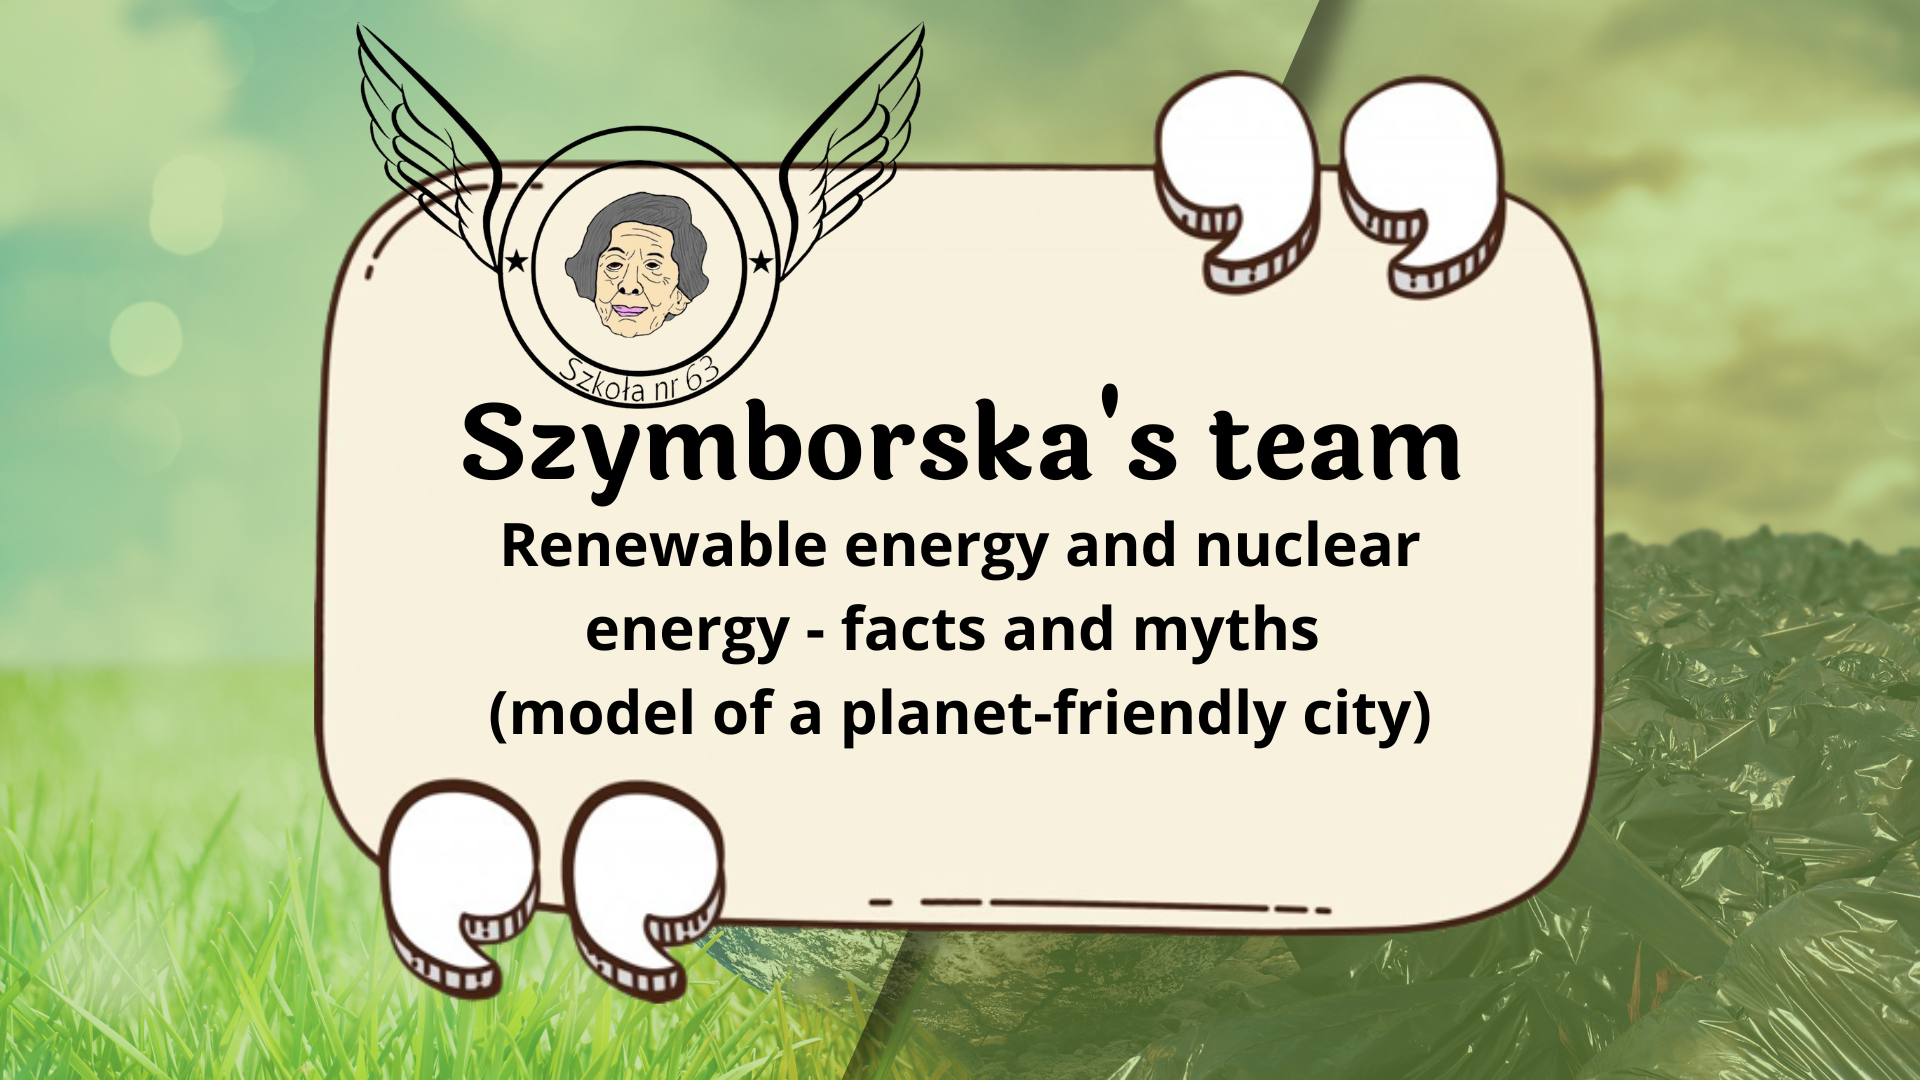 Renewable energy and nuclear energy – facts and myths (planet-friendly city model)